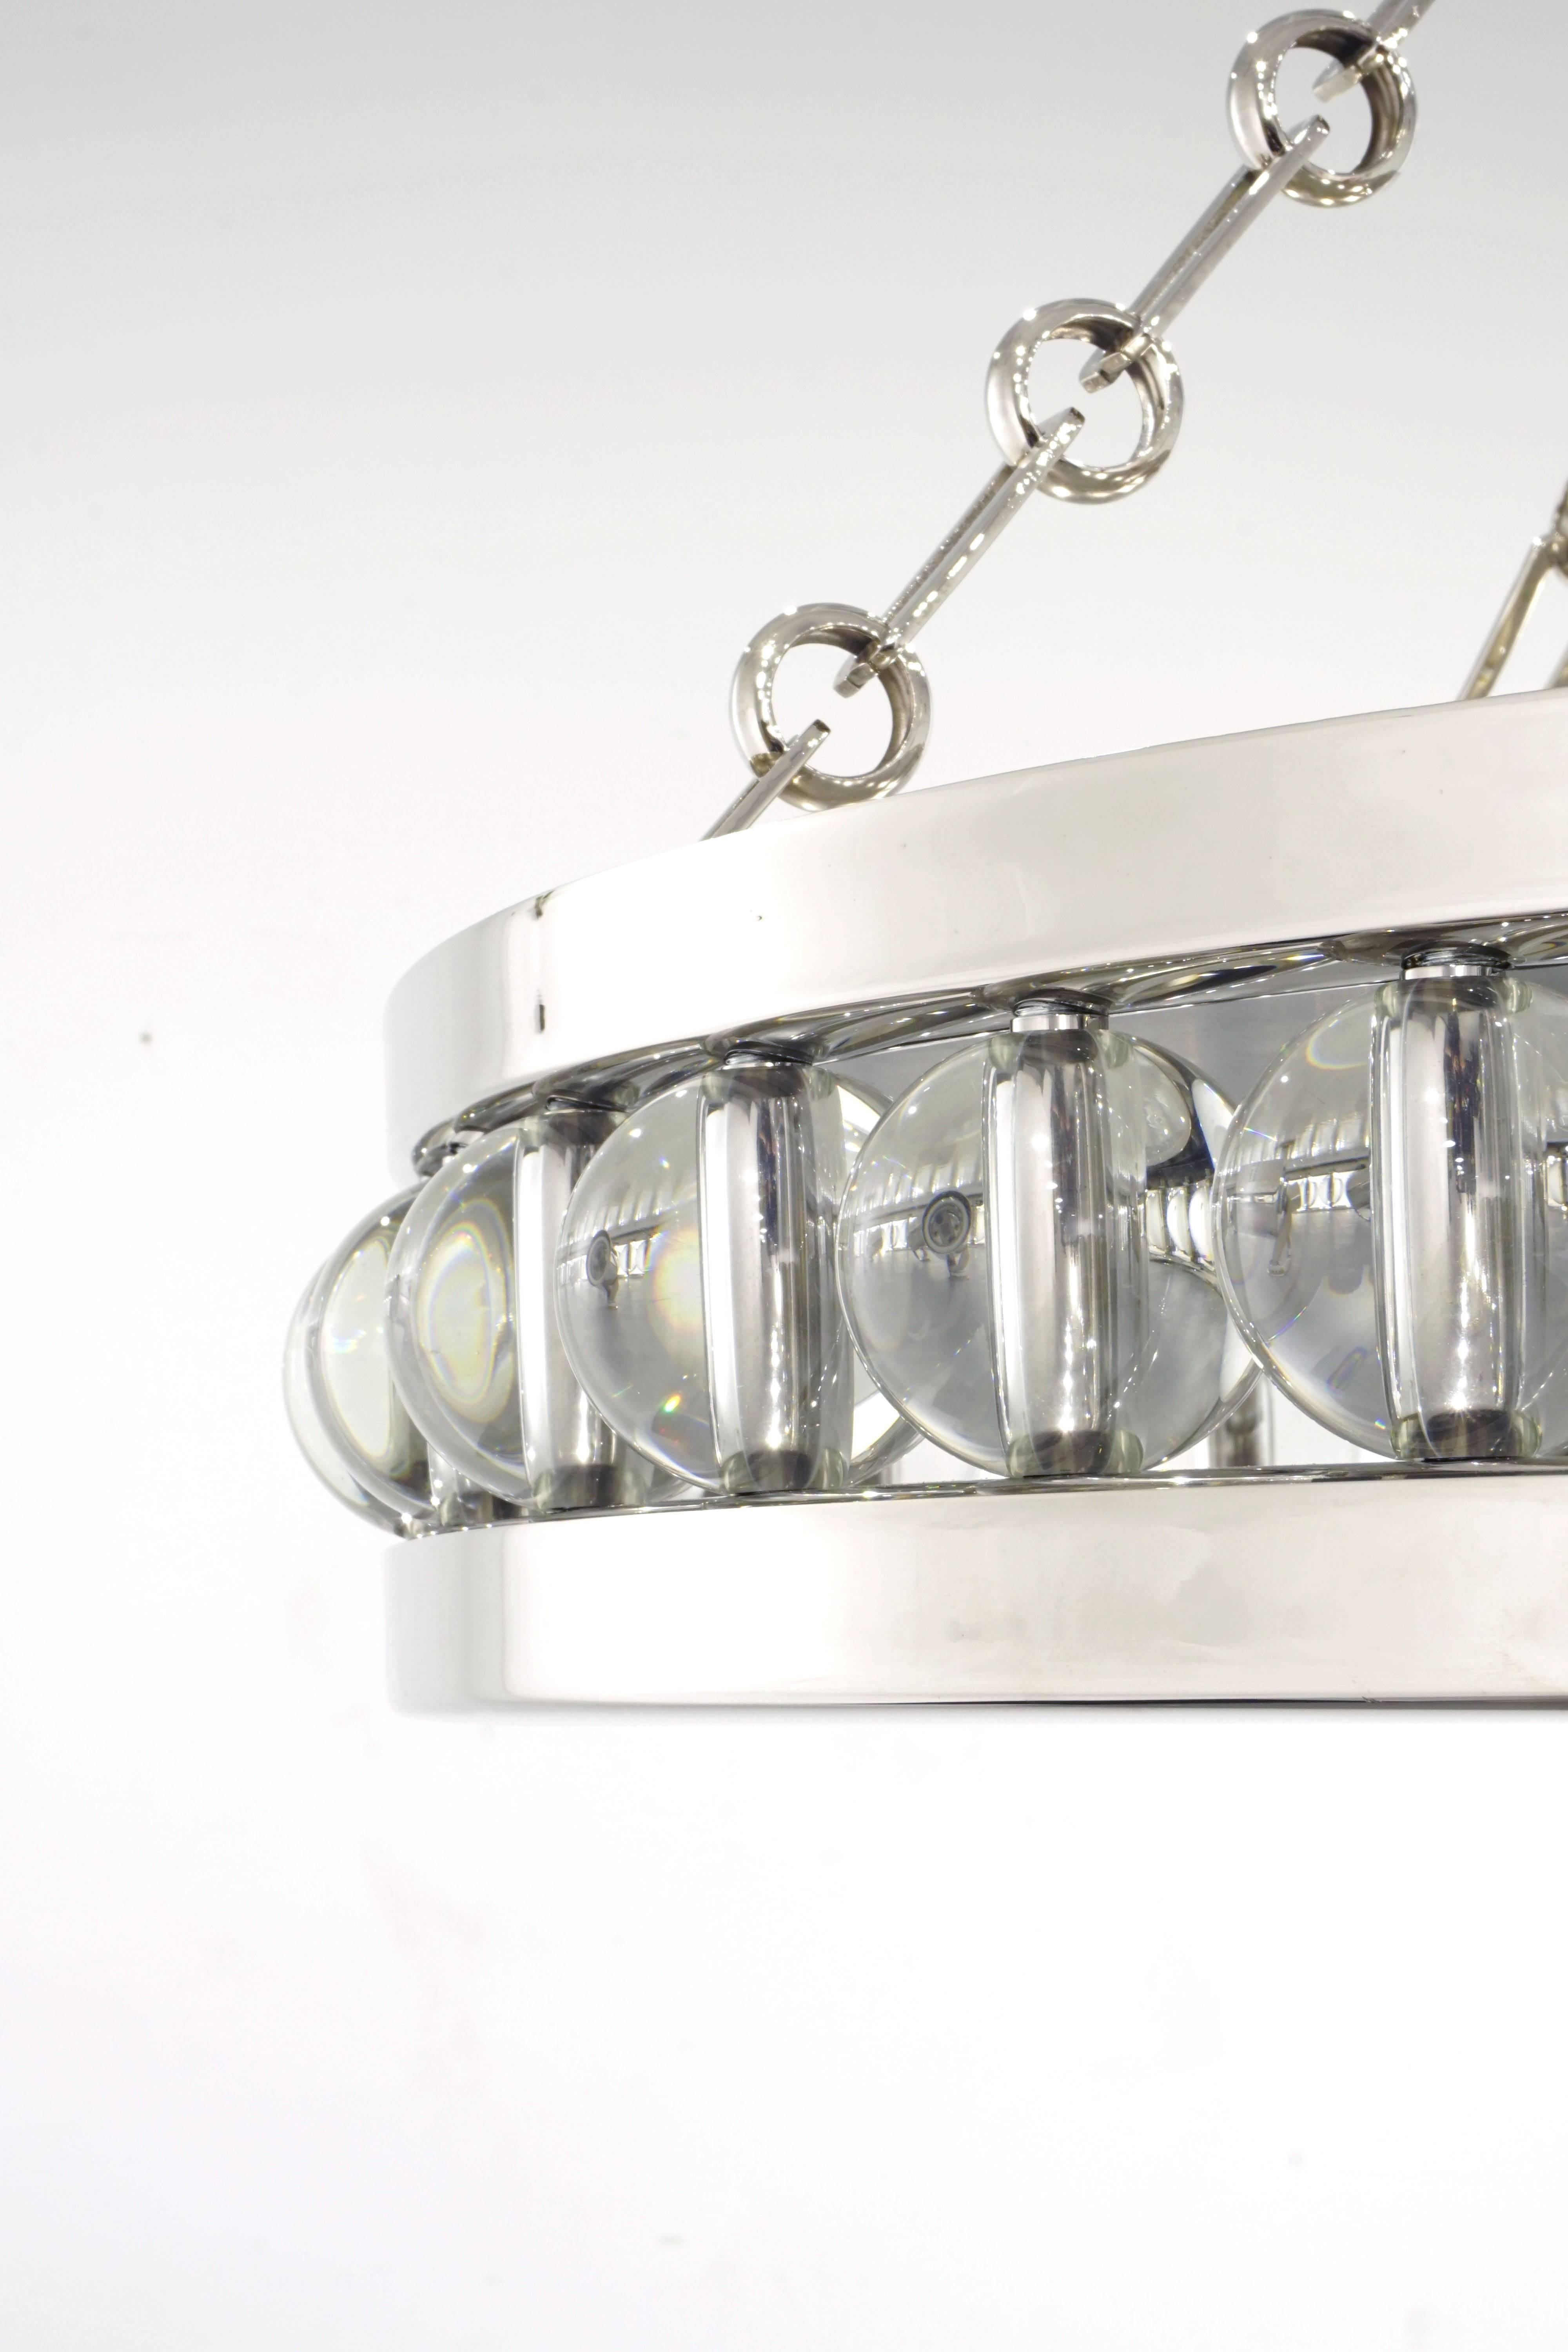 Art Deco Large Tambour Pendant Light with Chain by David Duncan Studio For Sale